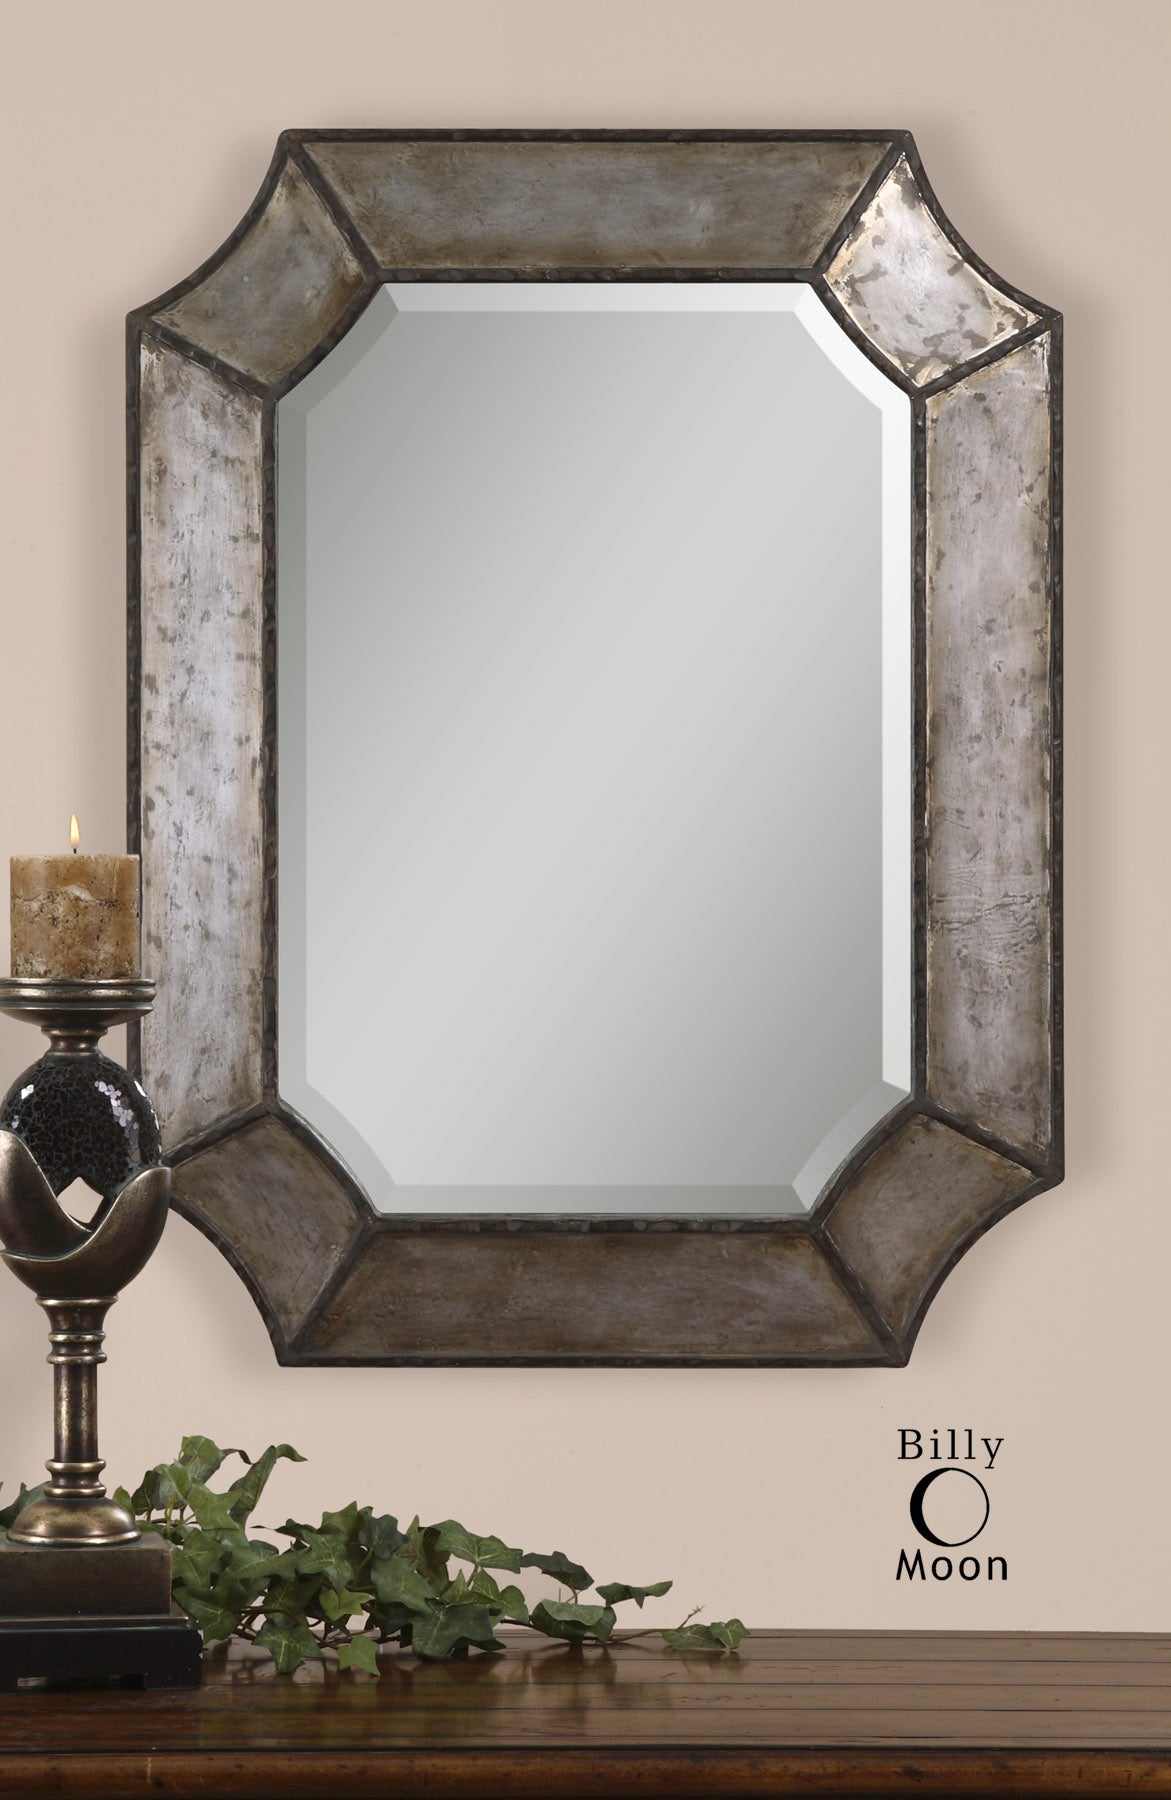 Frame Is Made Of Distressed, Hammered Aluminum With Burnished Edges And Rustic Bronze Details. Mirror Has A Generous 1 1/4...